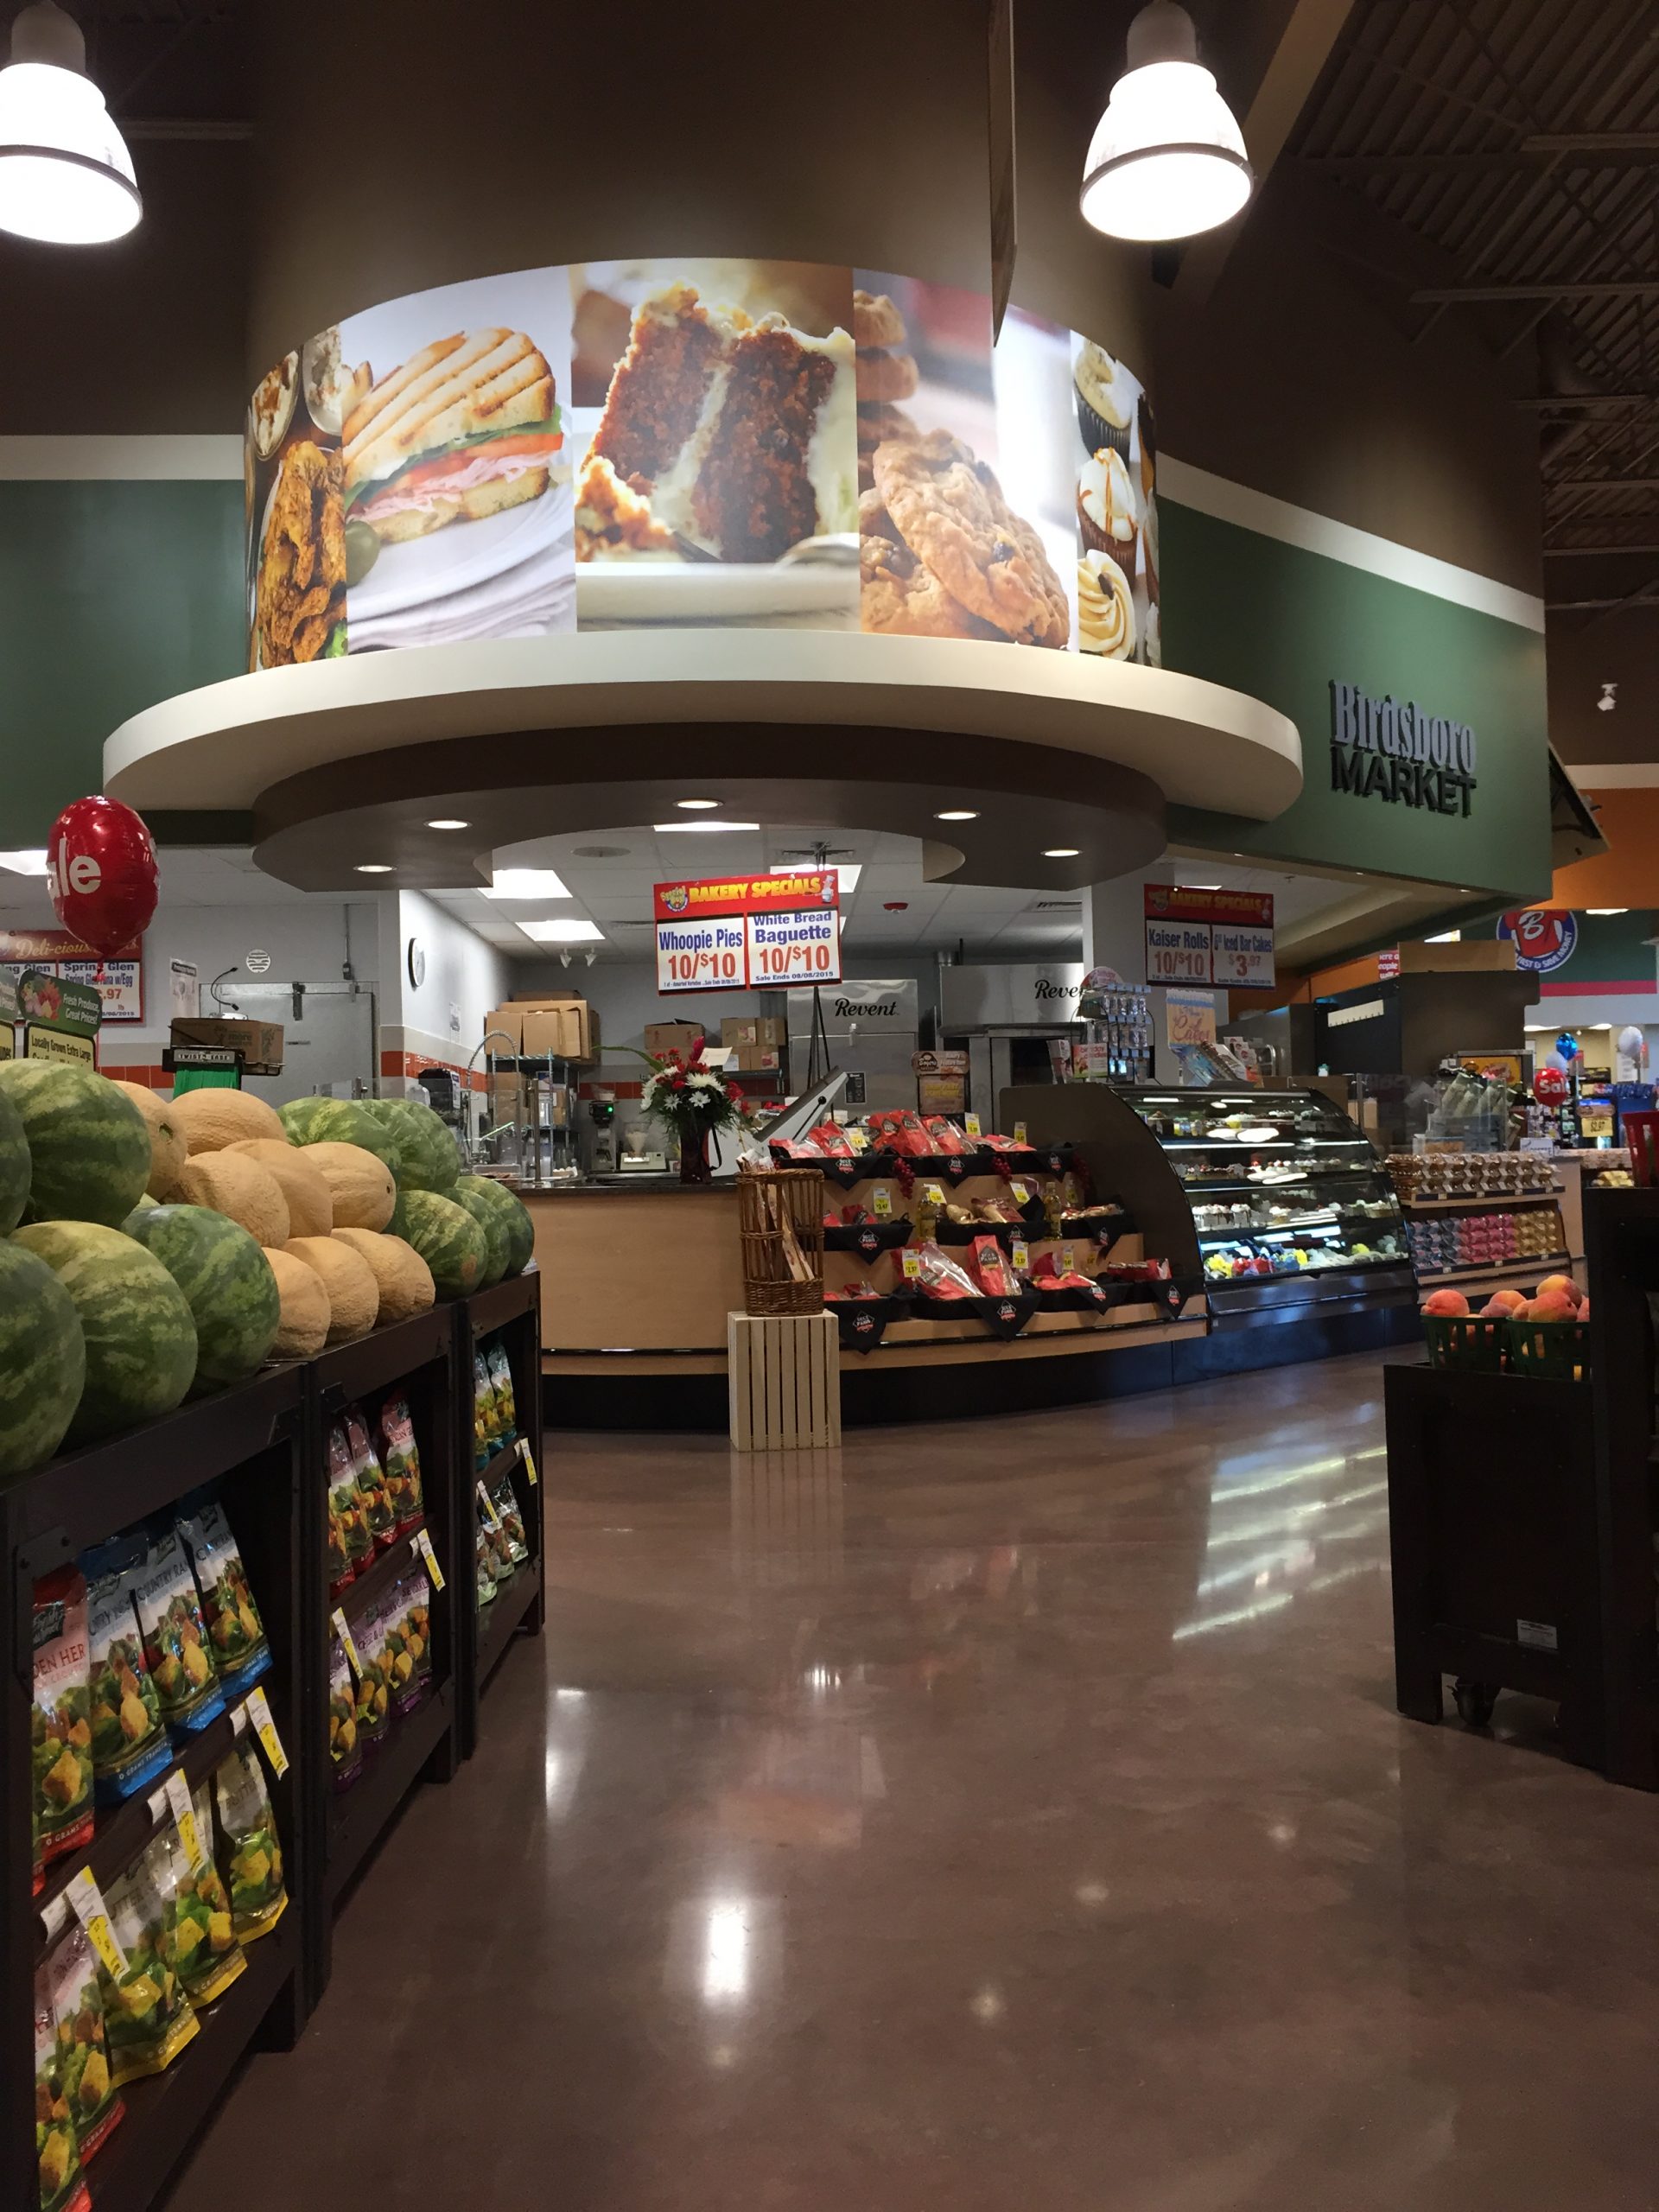 StoreMasters chose materials, cases, fixtures, and décor that reinforced the Boyer's Foods brand